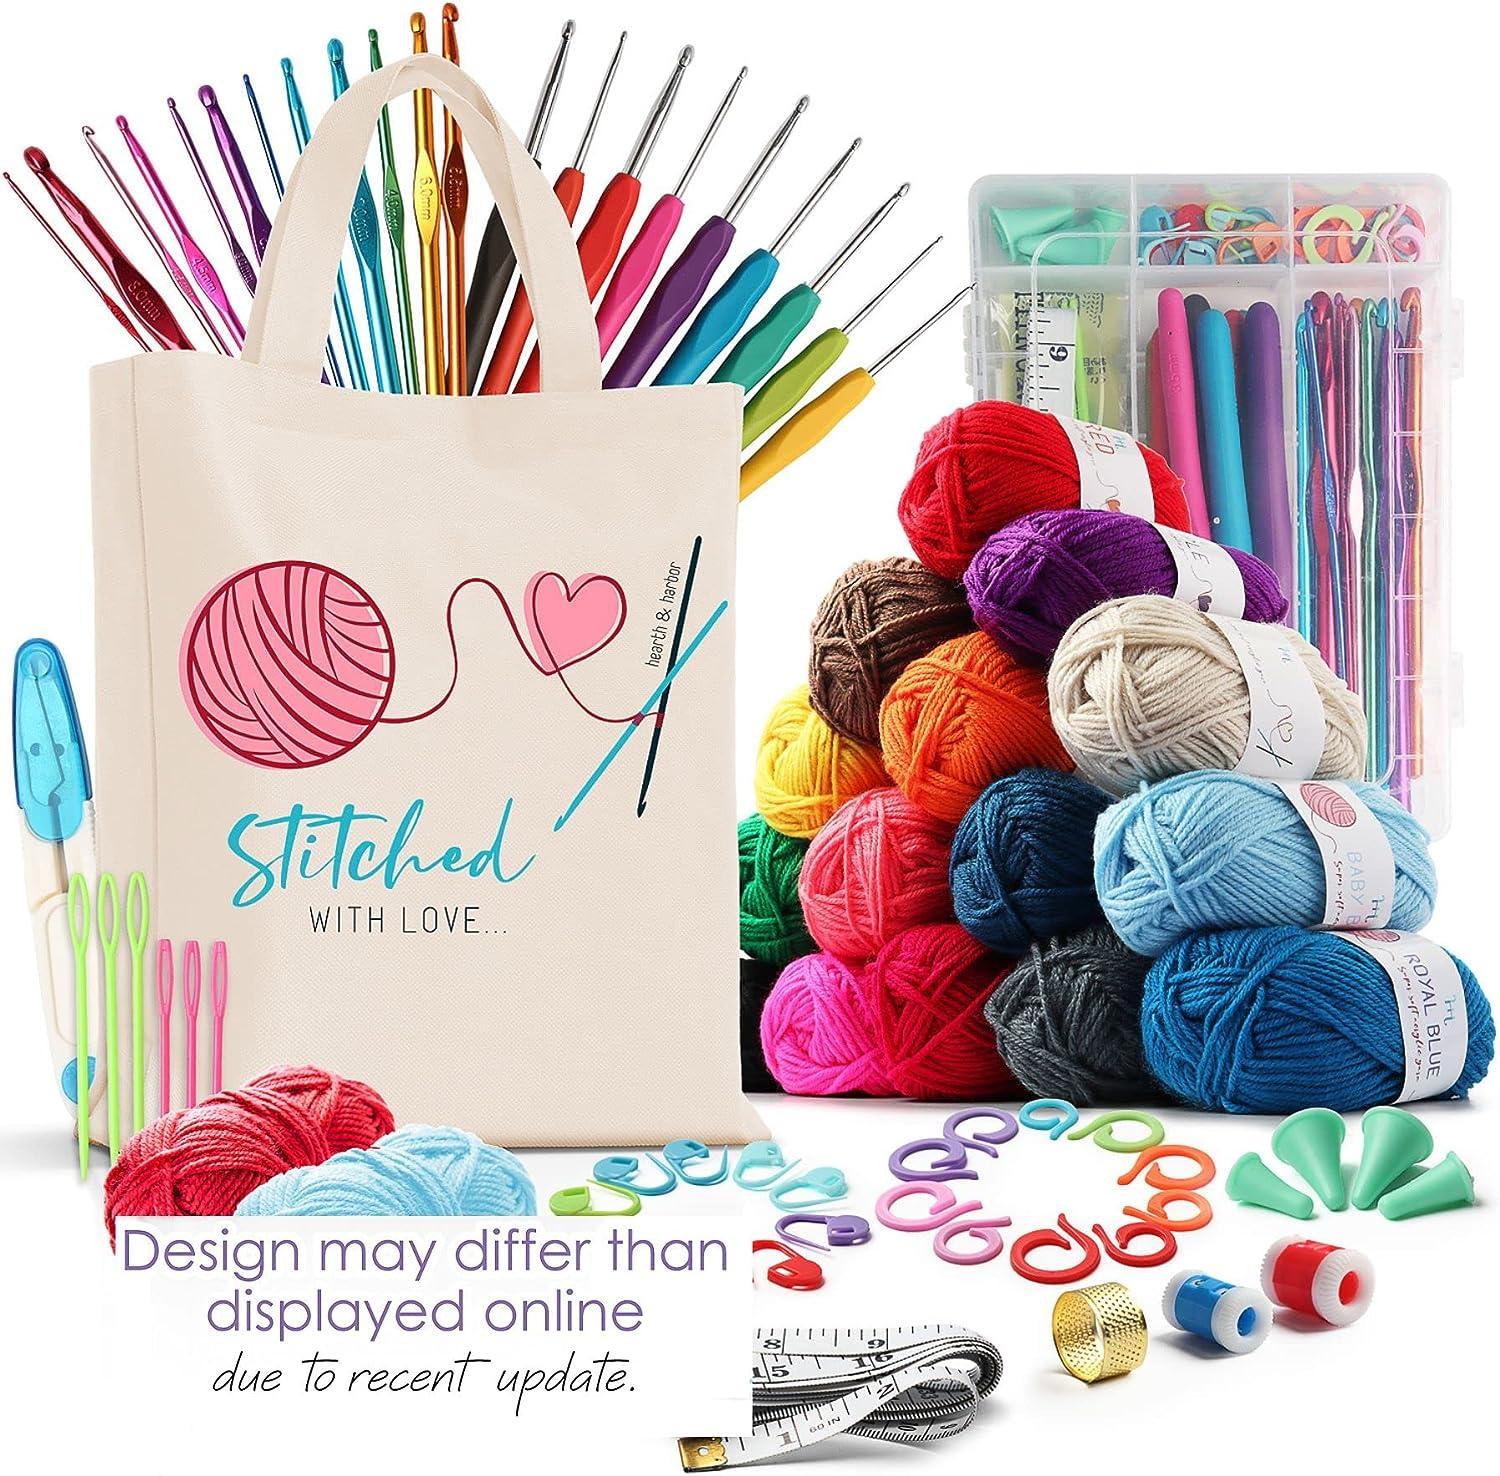 73 Piece Crochet Kit for Beginners Adults and Kids, Premium Crochet Set  with 21 Crochet Hooks Set and 1500 Yards of Yarn for Crocheting Kit, Canvas